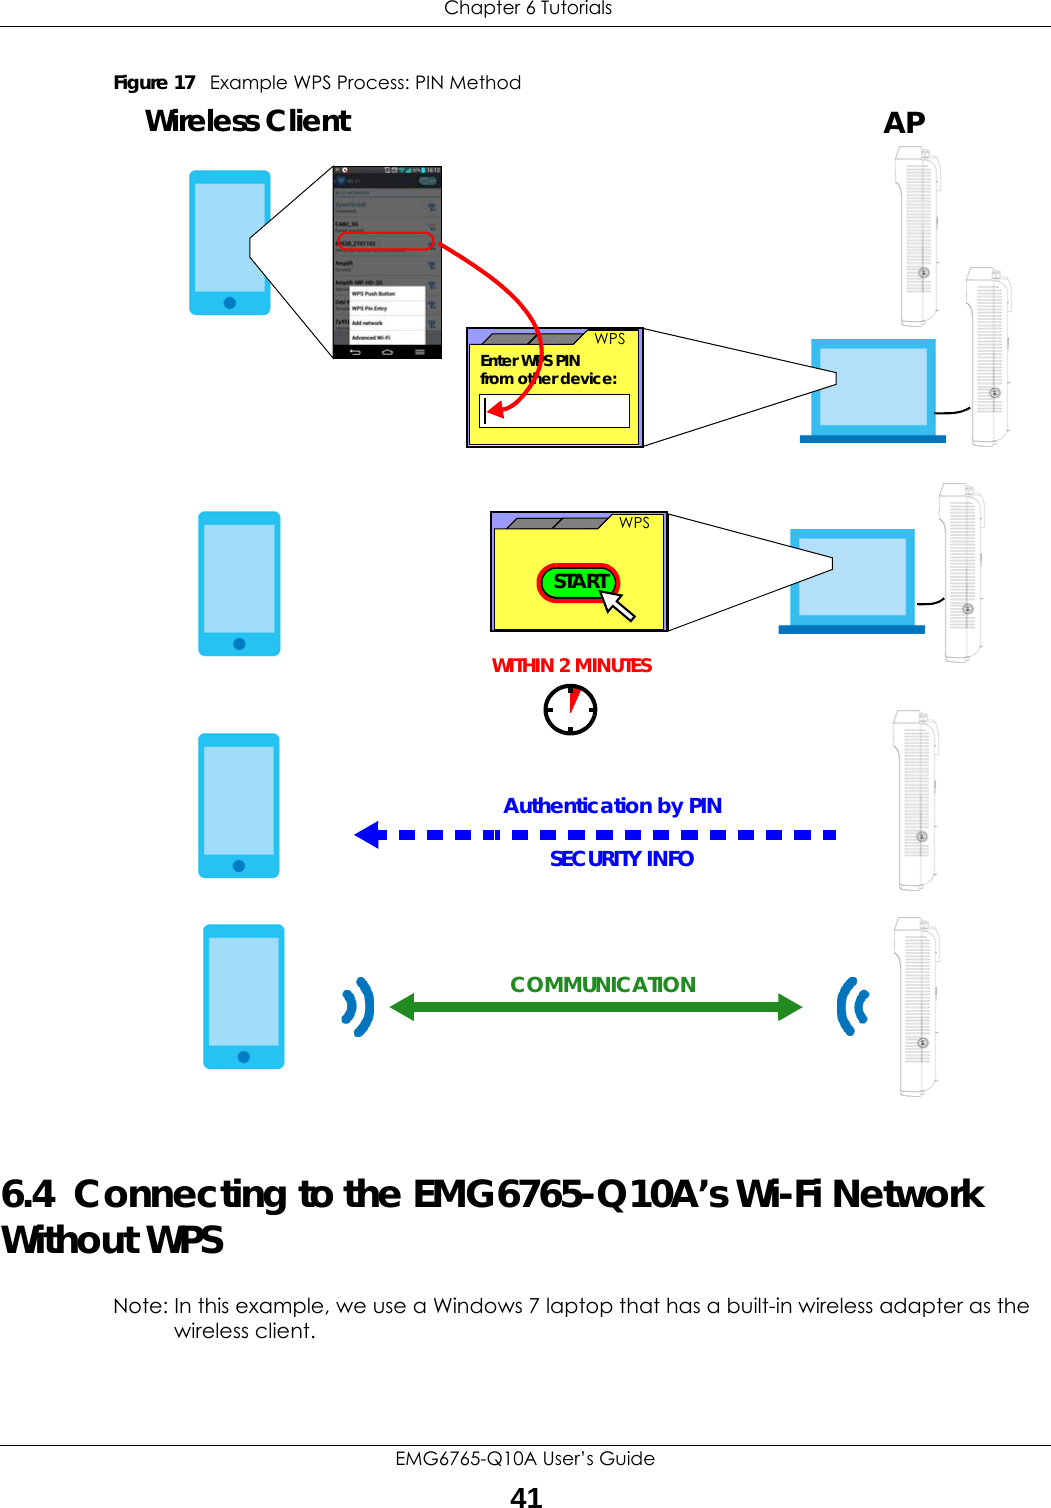  Chapter 6 TutorialsEMG6765-Q10A User’s Guide41Figure 17   Example WPS Process: PIN Method6.4  Connecting to the EMG6765-Q10A’s Wi-Fi Network Without WPSNote: In this example, we use a Windows 7 laptop that has a built-in wireless adapter as the wireless client.SECURITY INFOWITHIN 2 MINUTESEnter WPS PIN  WPSfrom other device: WPSSTARTWireless Client APAuthentication by PINCOMMUNICATION